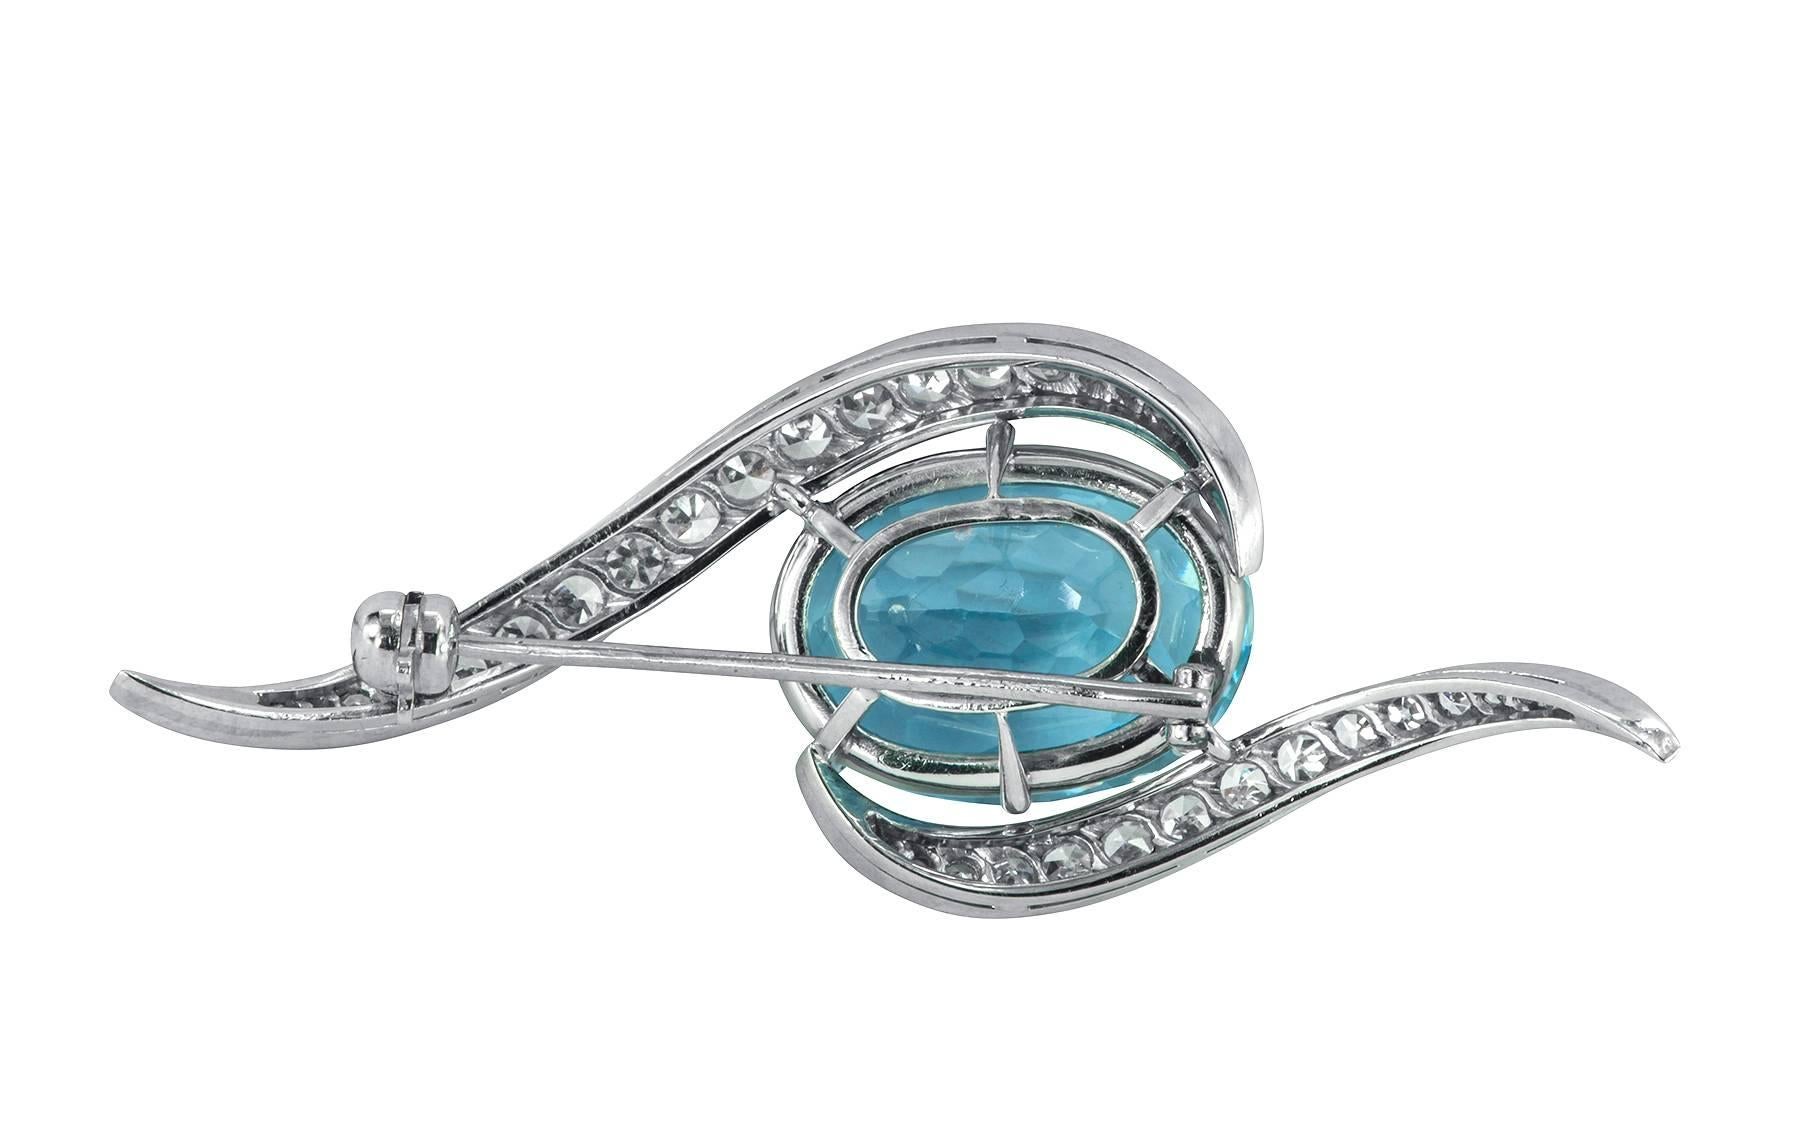 A gorgeous and easy to wear aquamarine and diamond platinum brooch.  The oval aquamarine is estimated to be 9.66cts, accompanied by 0.60cts in single cut diamonds in a curved bypass fashion.

2.12" in length